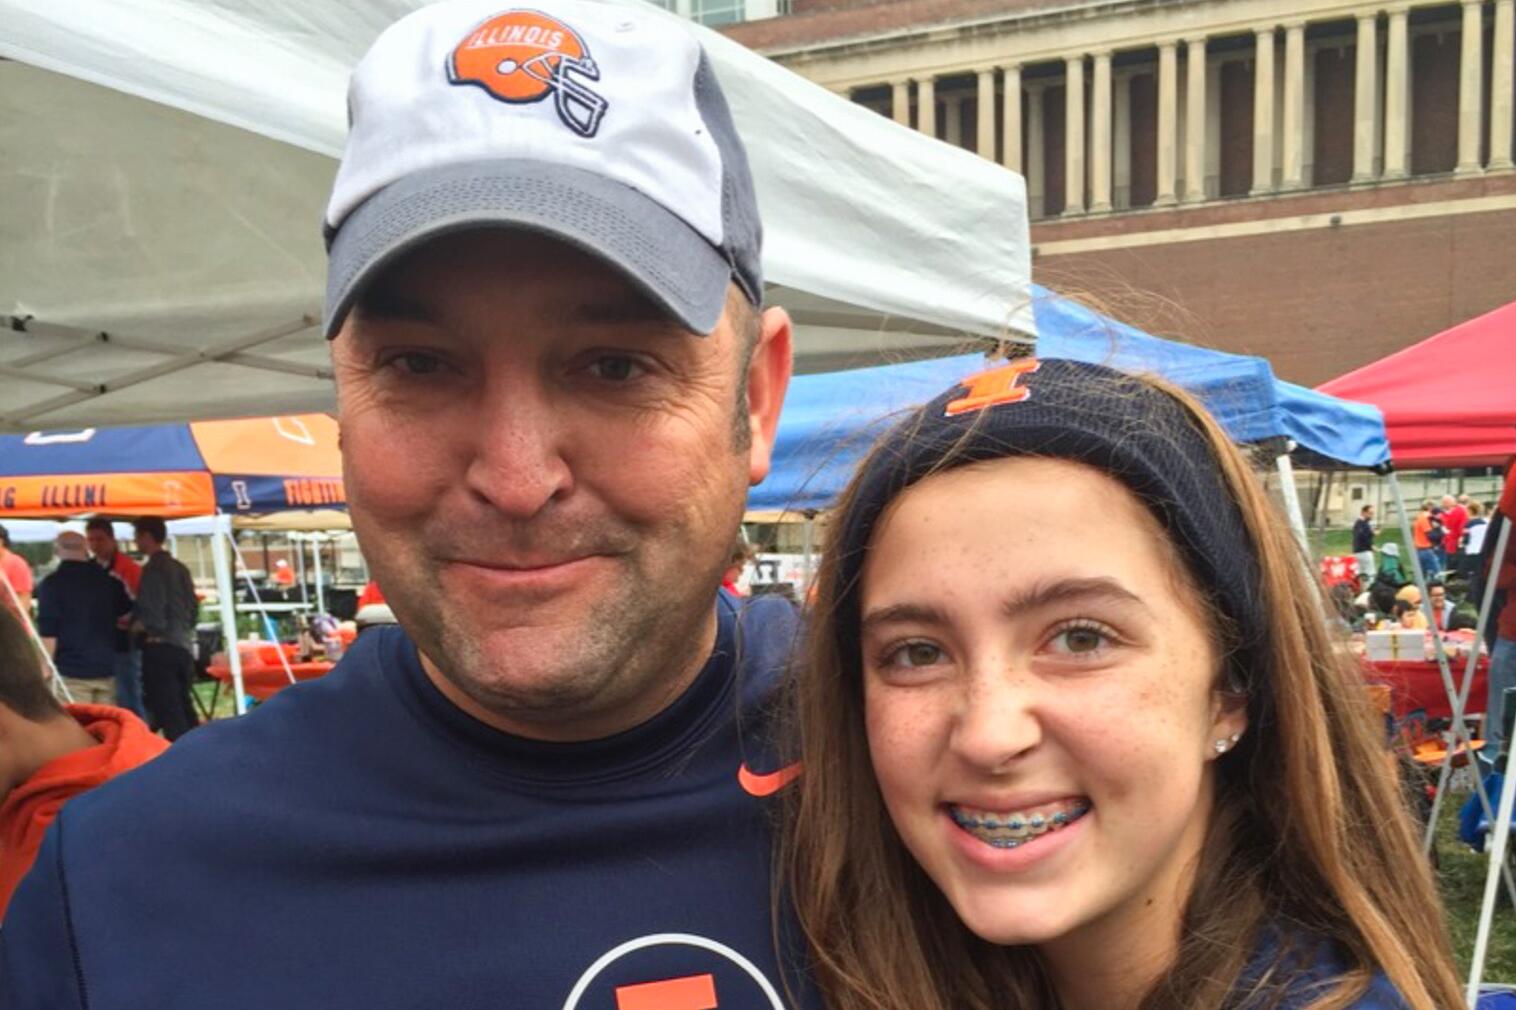 Jacqueline Springer and Jay Haning tailgating at the Illinois Homecoming game in 2015.